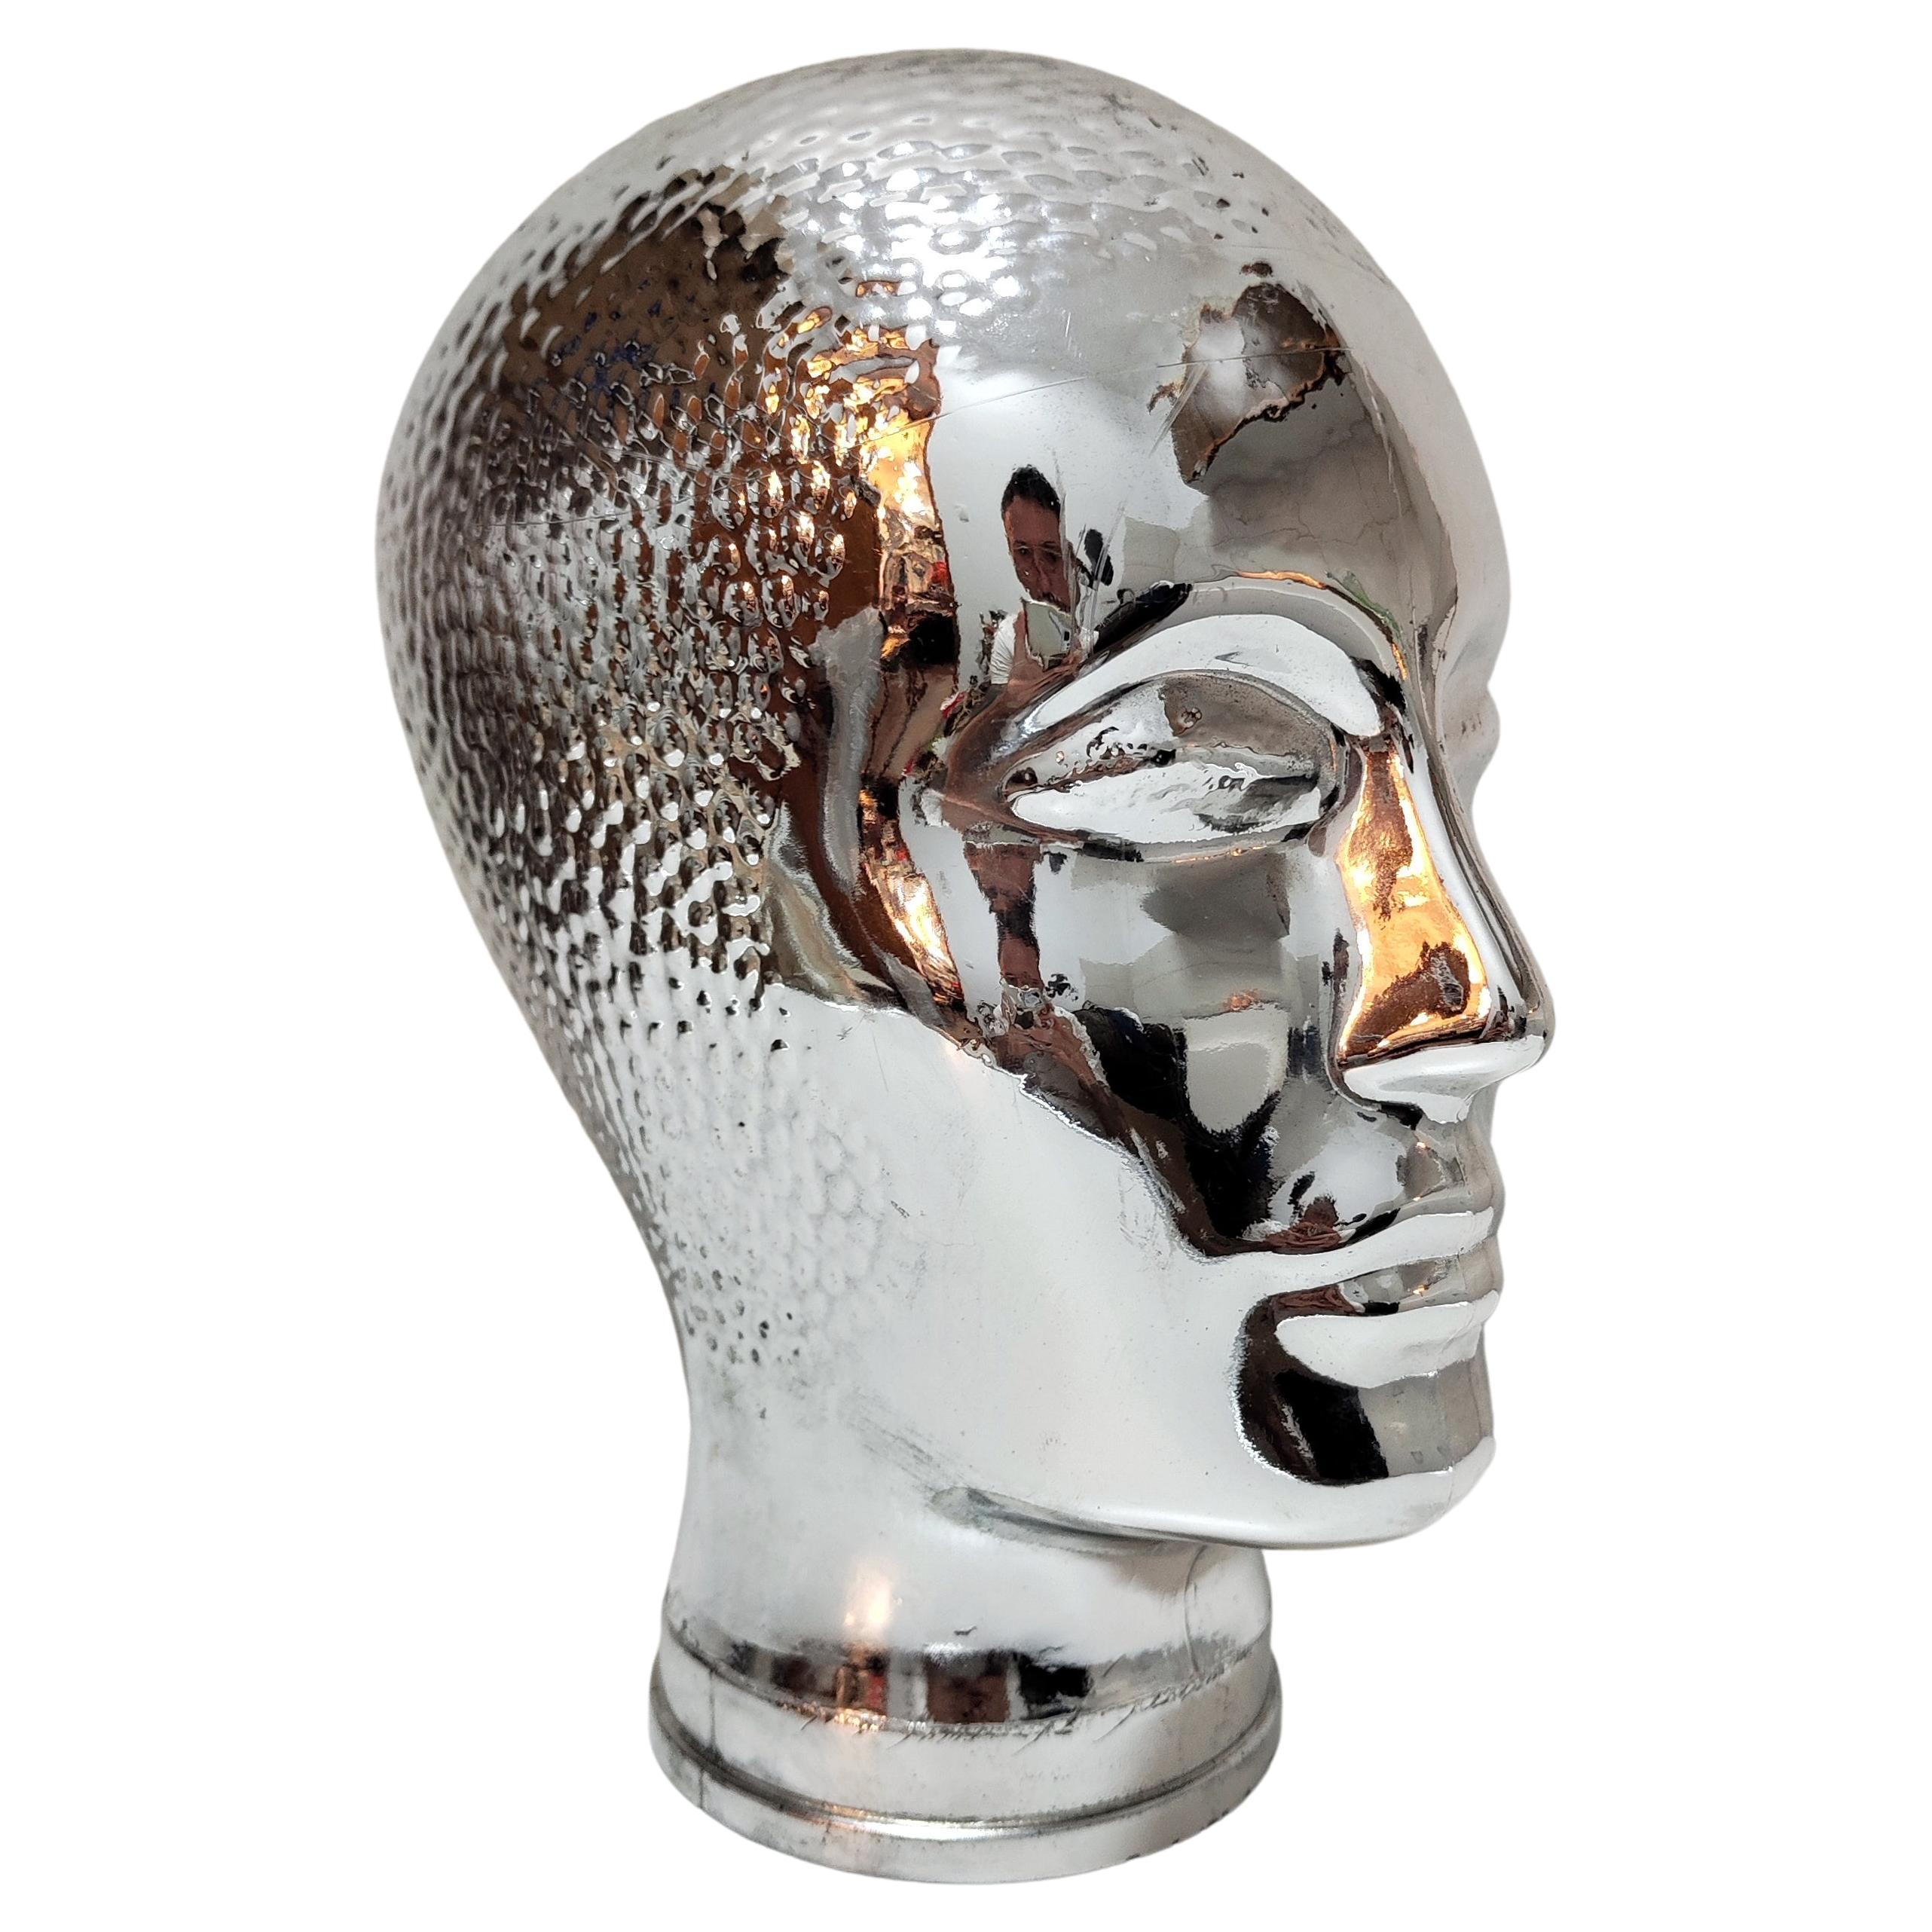 https://a.1stdibscdn.com/mannequin-silver-glass-head-attr-to-fornasetti-italy-1960s-for-sale/f_74432/f_359688521693514156750/f_35968852_1693514157747_bg_processed.jpg